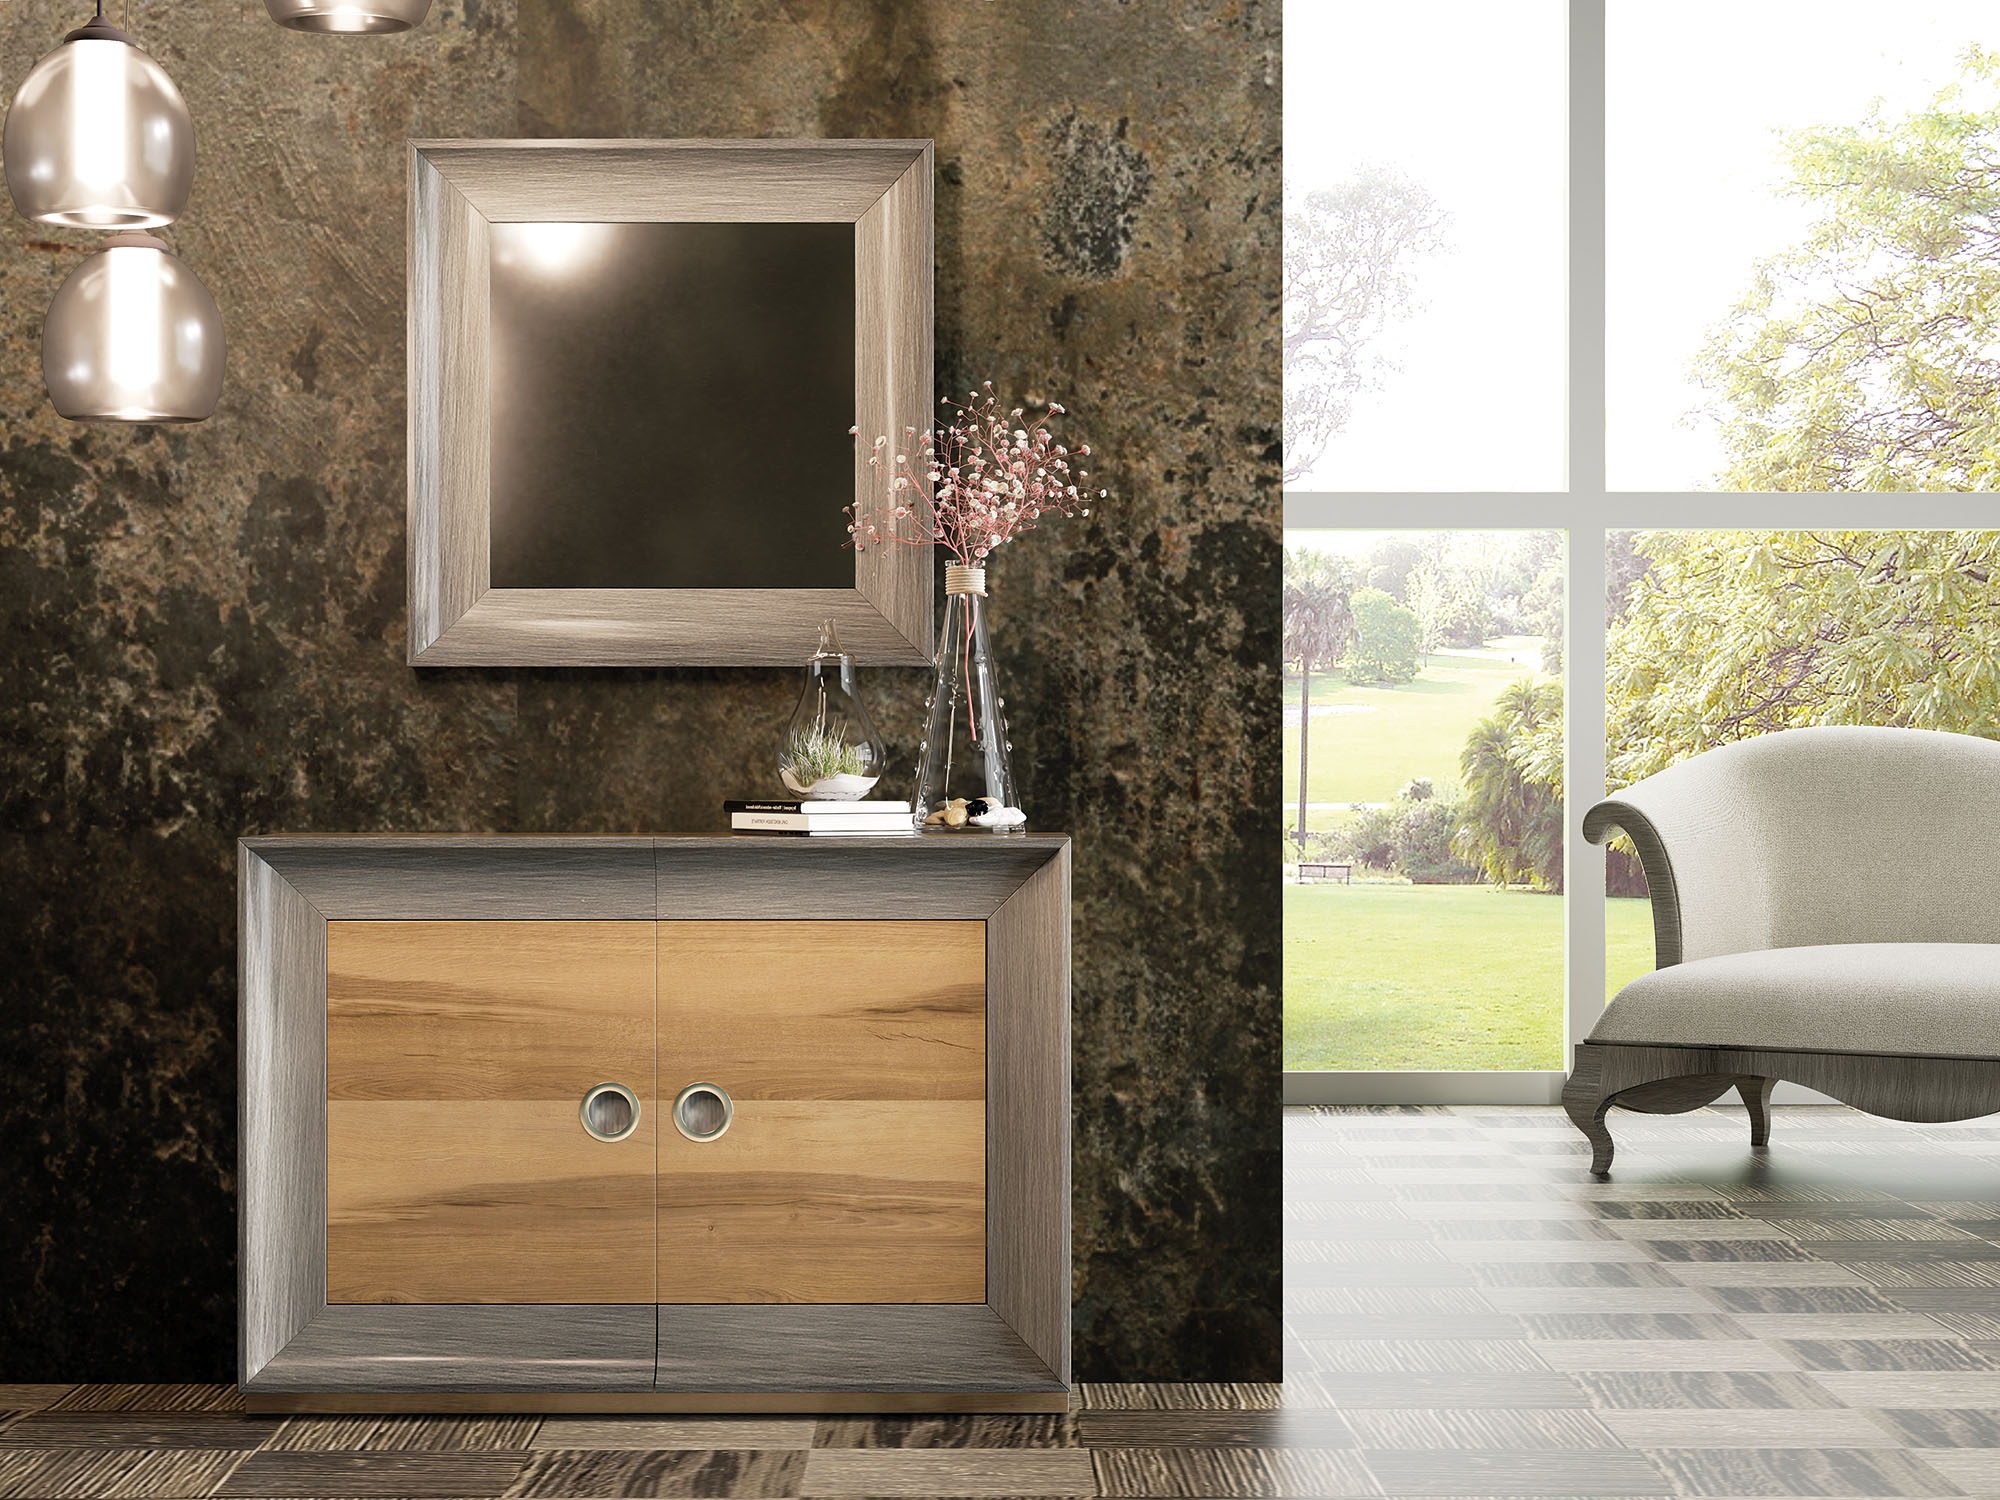 Brands Franco Kora Dining and Wall Units, Spain ZII.08 SHOE CABINET